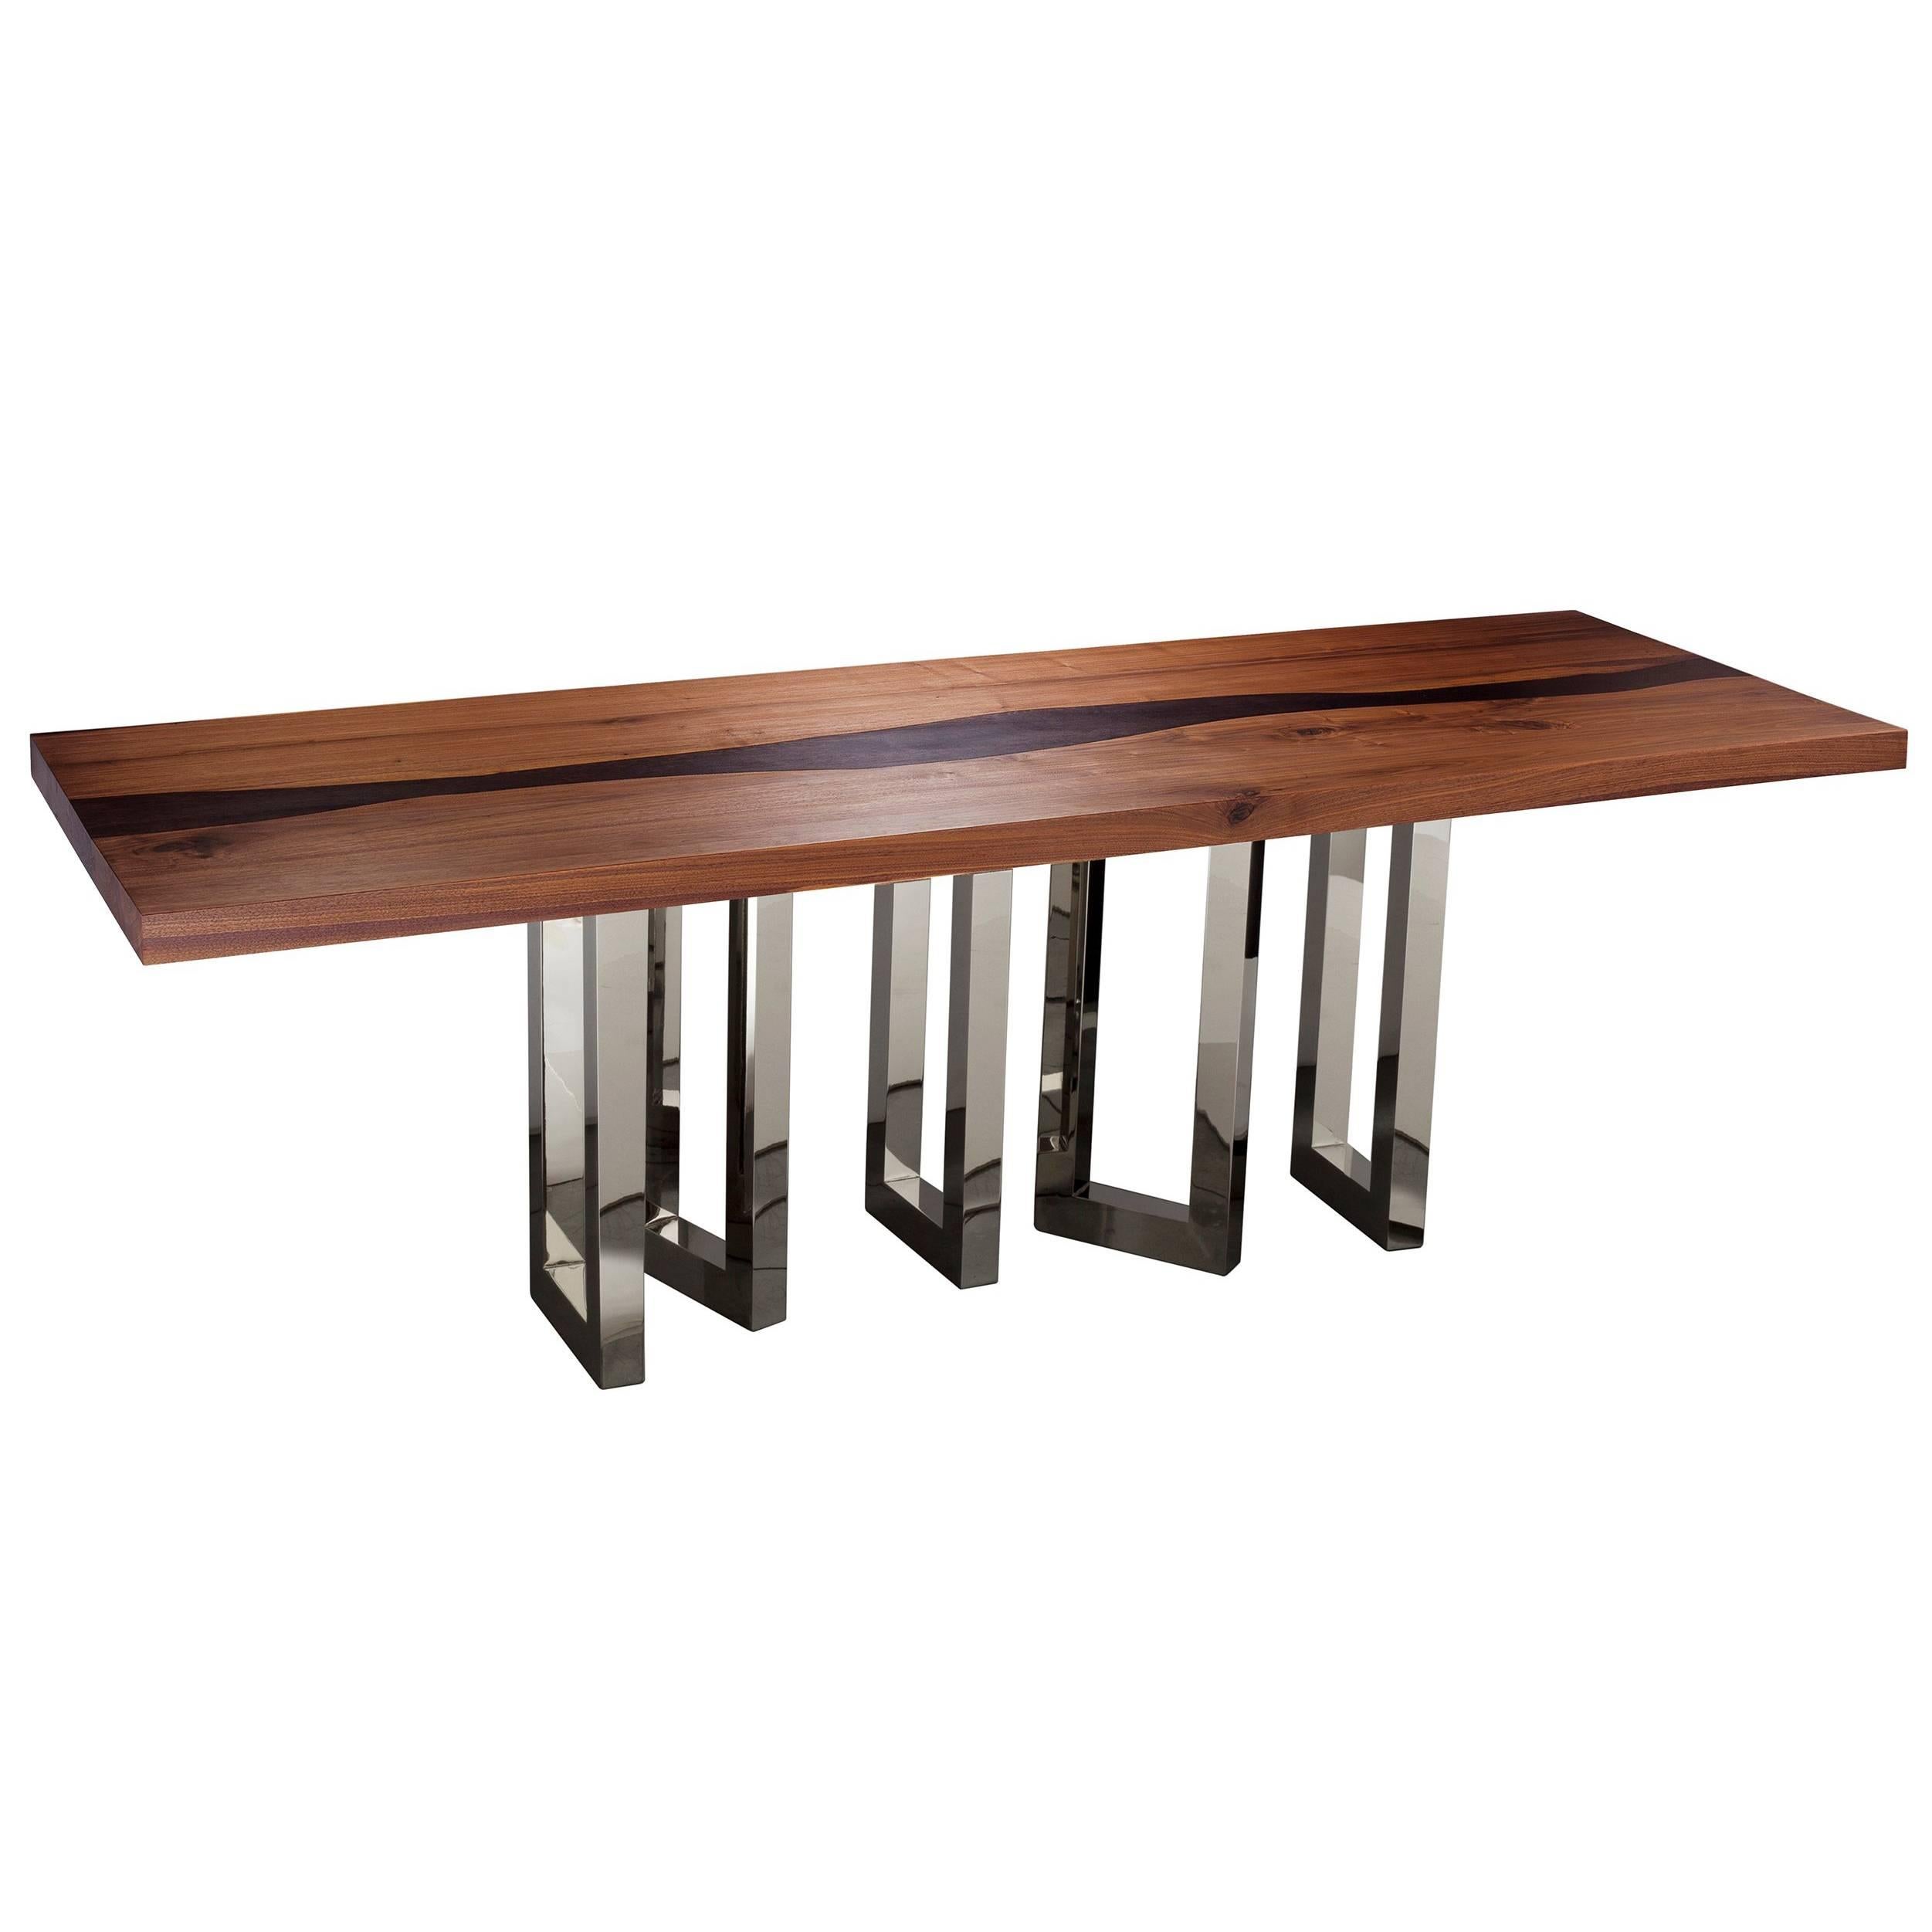 "Il Pezzo 6 Long Table" length 260cm/102.4” - walnut and wenge - nickel base For Sale